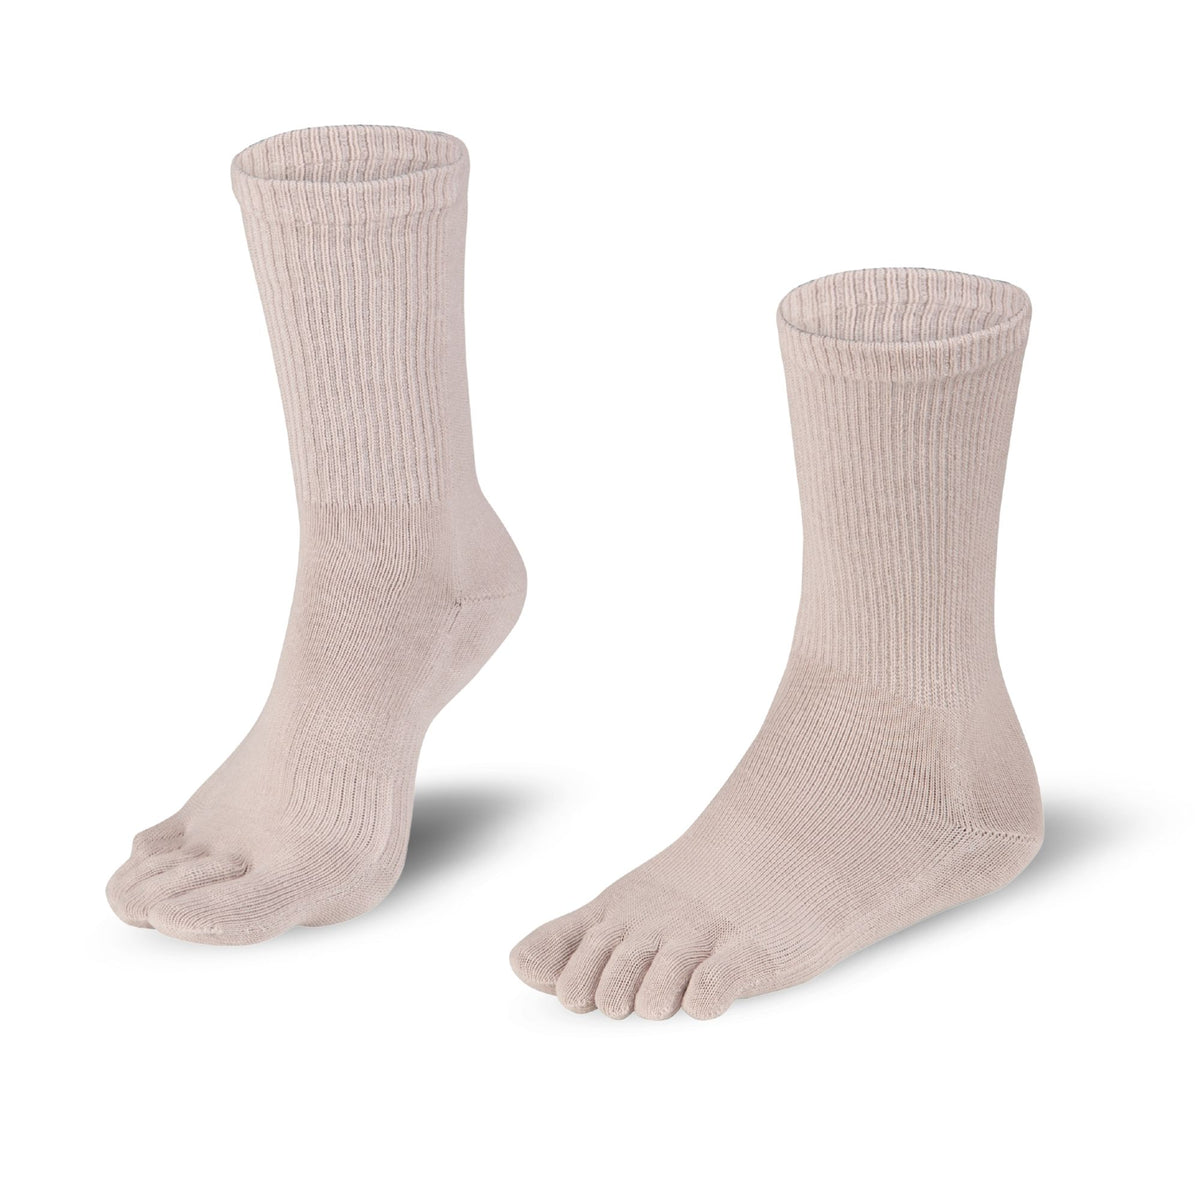 Dr. Foot Hallux Valgus Toes, Closed - Knitido®